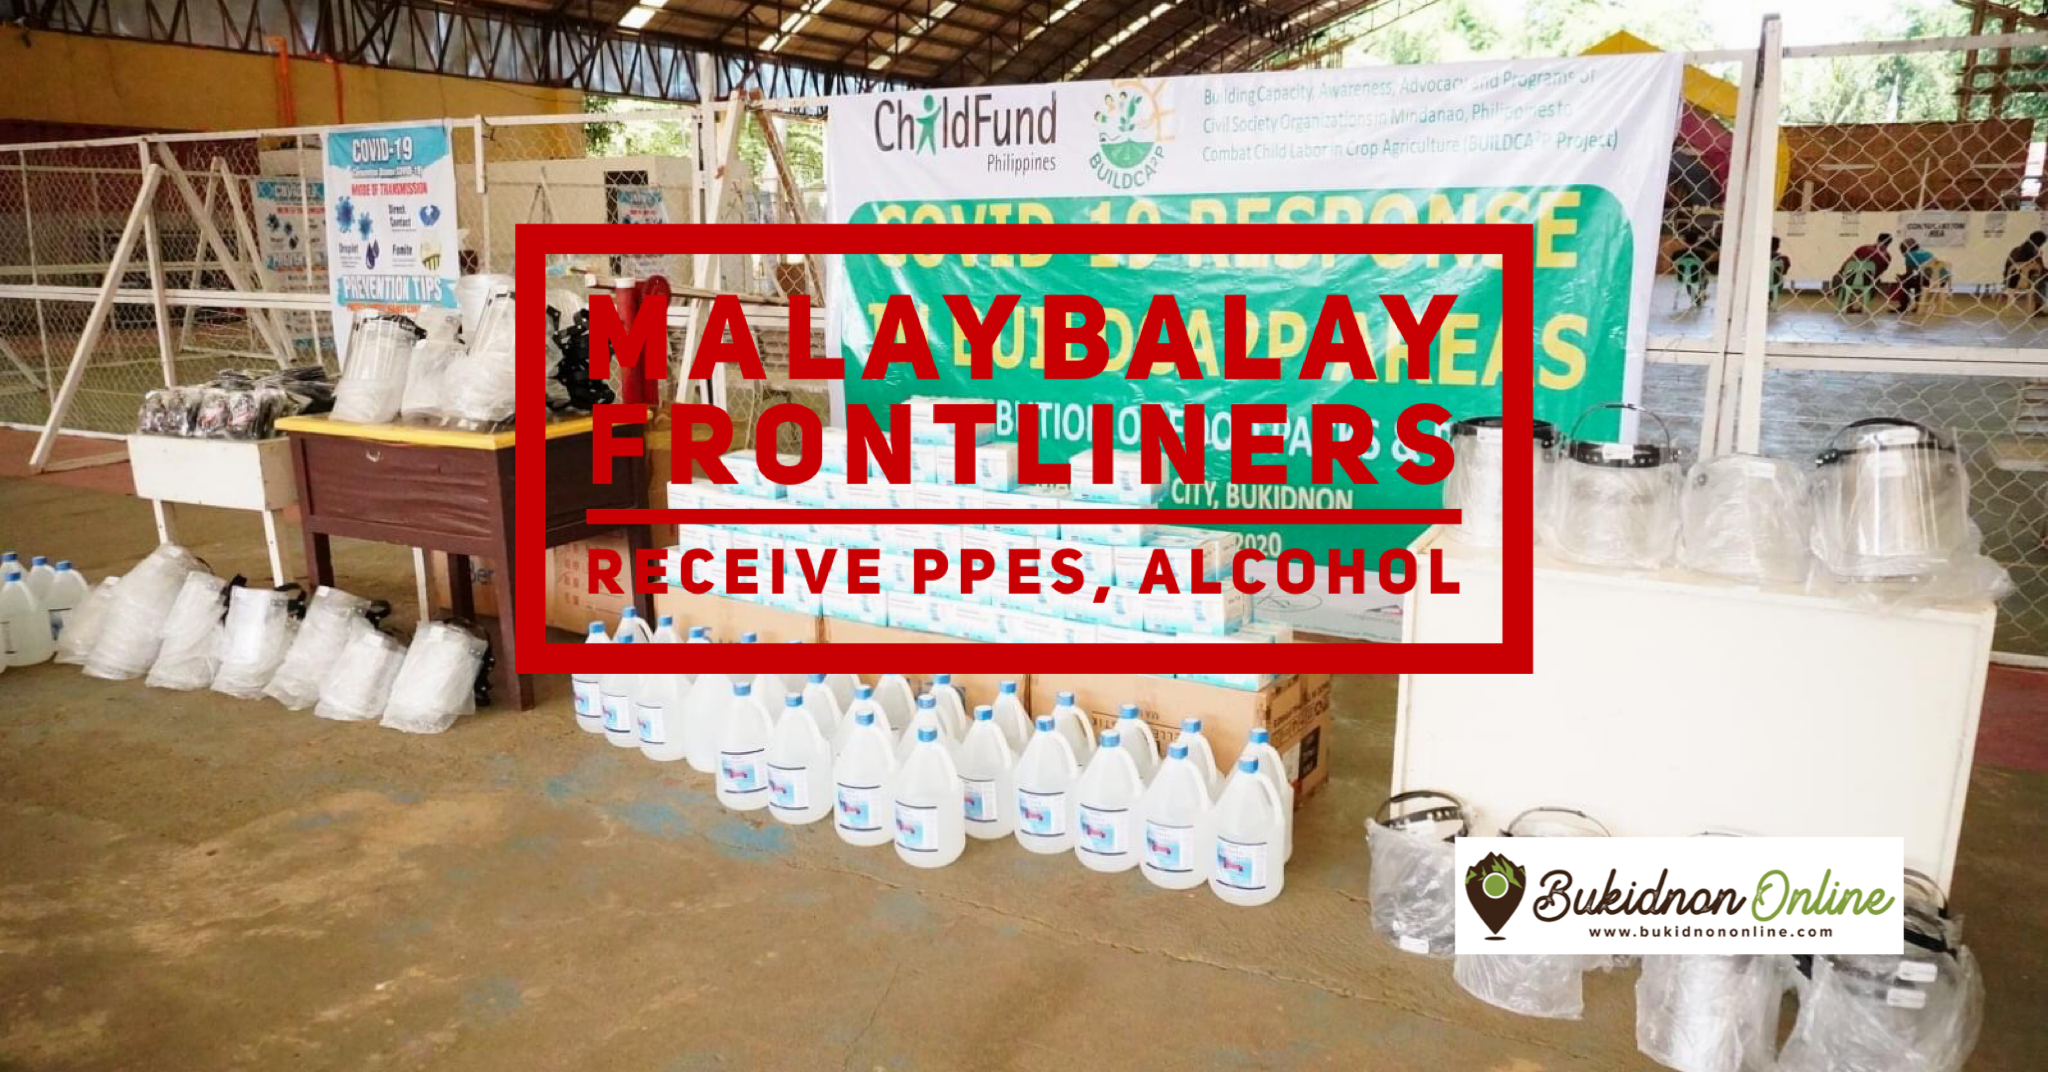 Malaybalay frontliners receive PPEs, alcohol